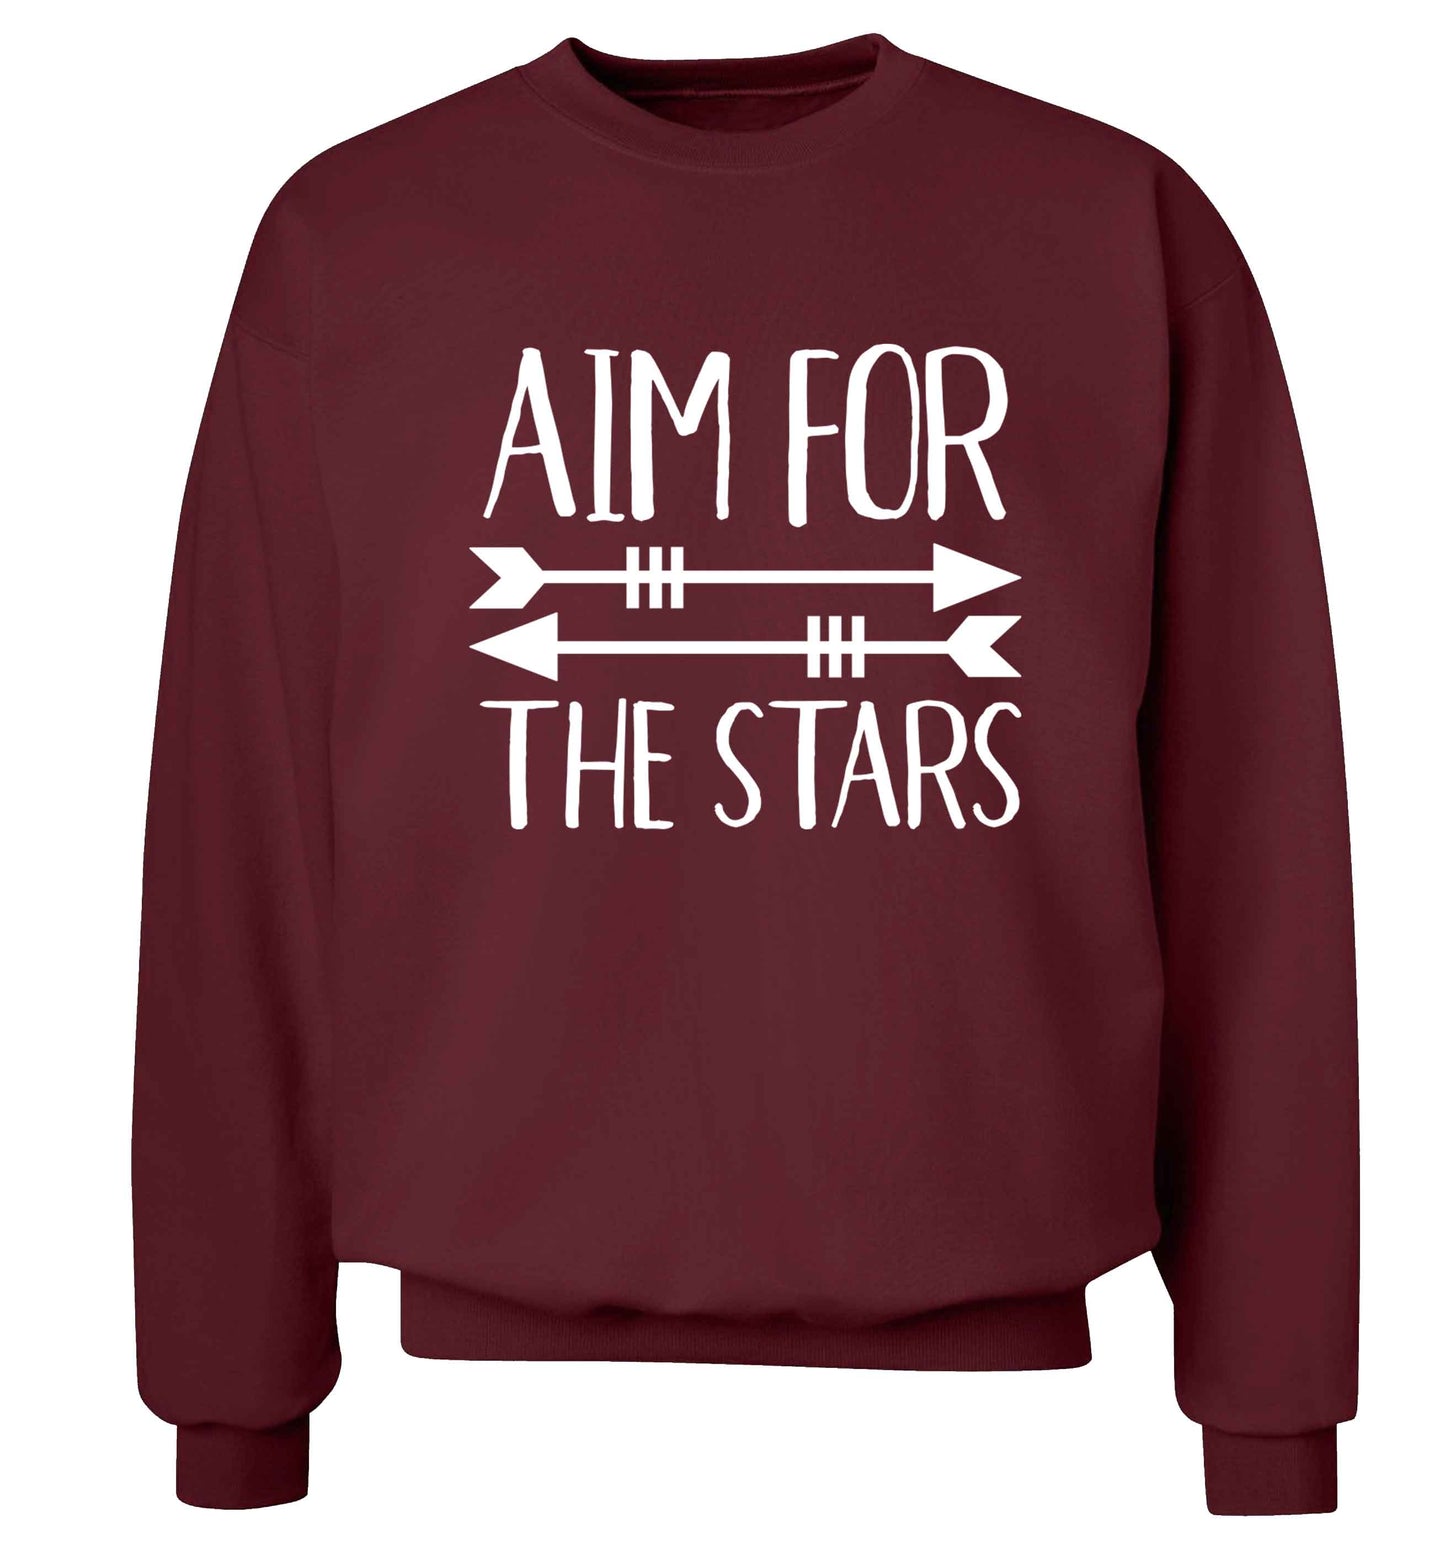 Aim for the stars Adult's unisex maroon Sweater 2XL